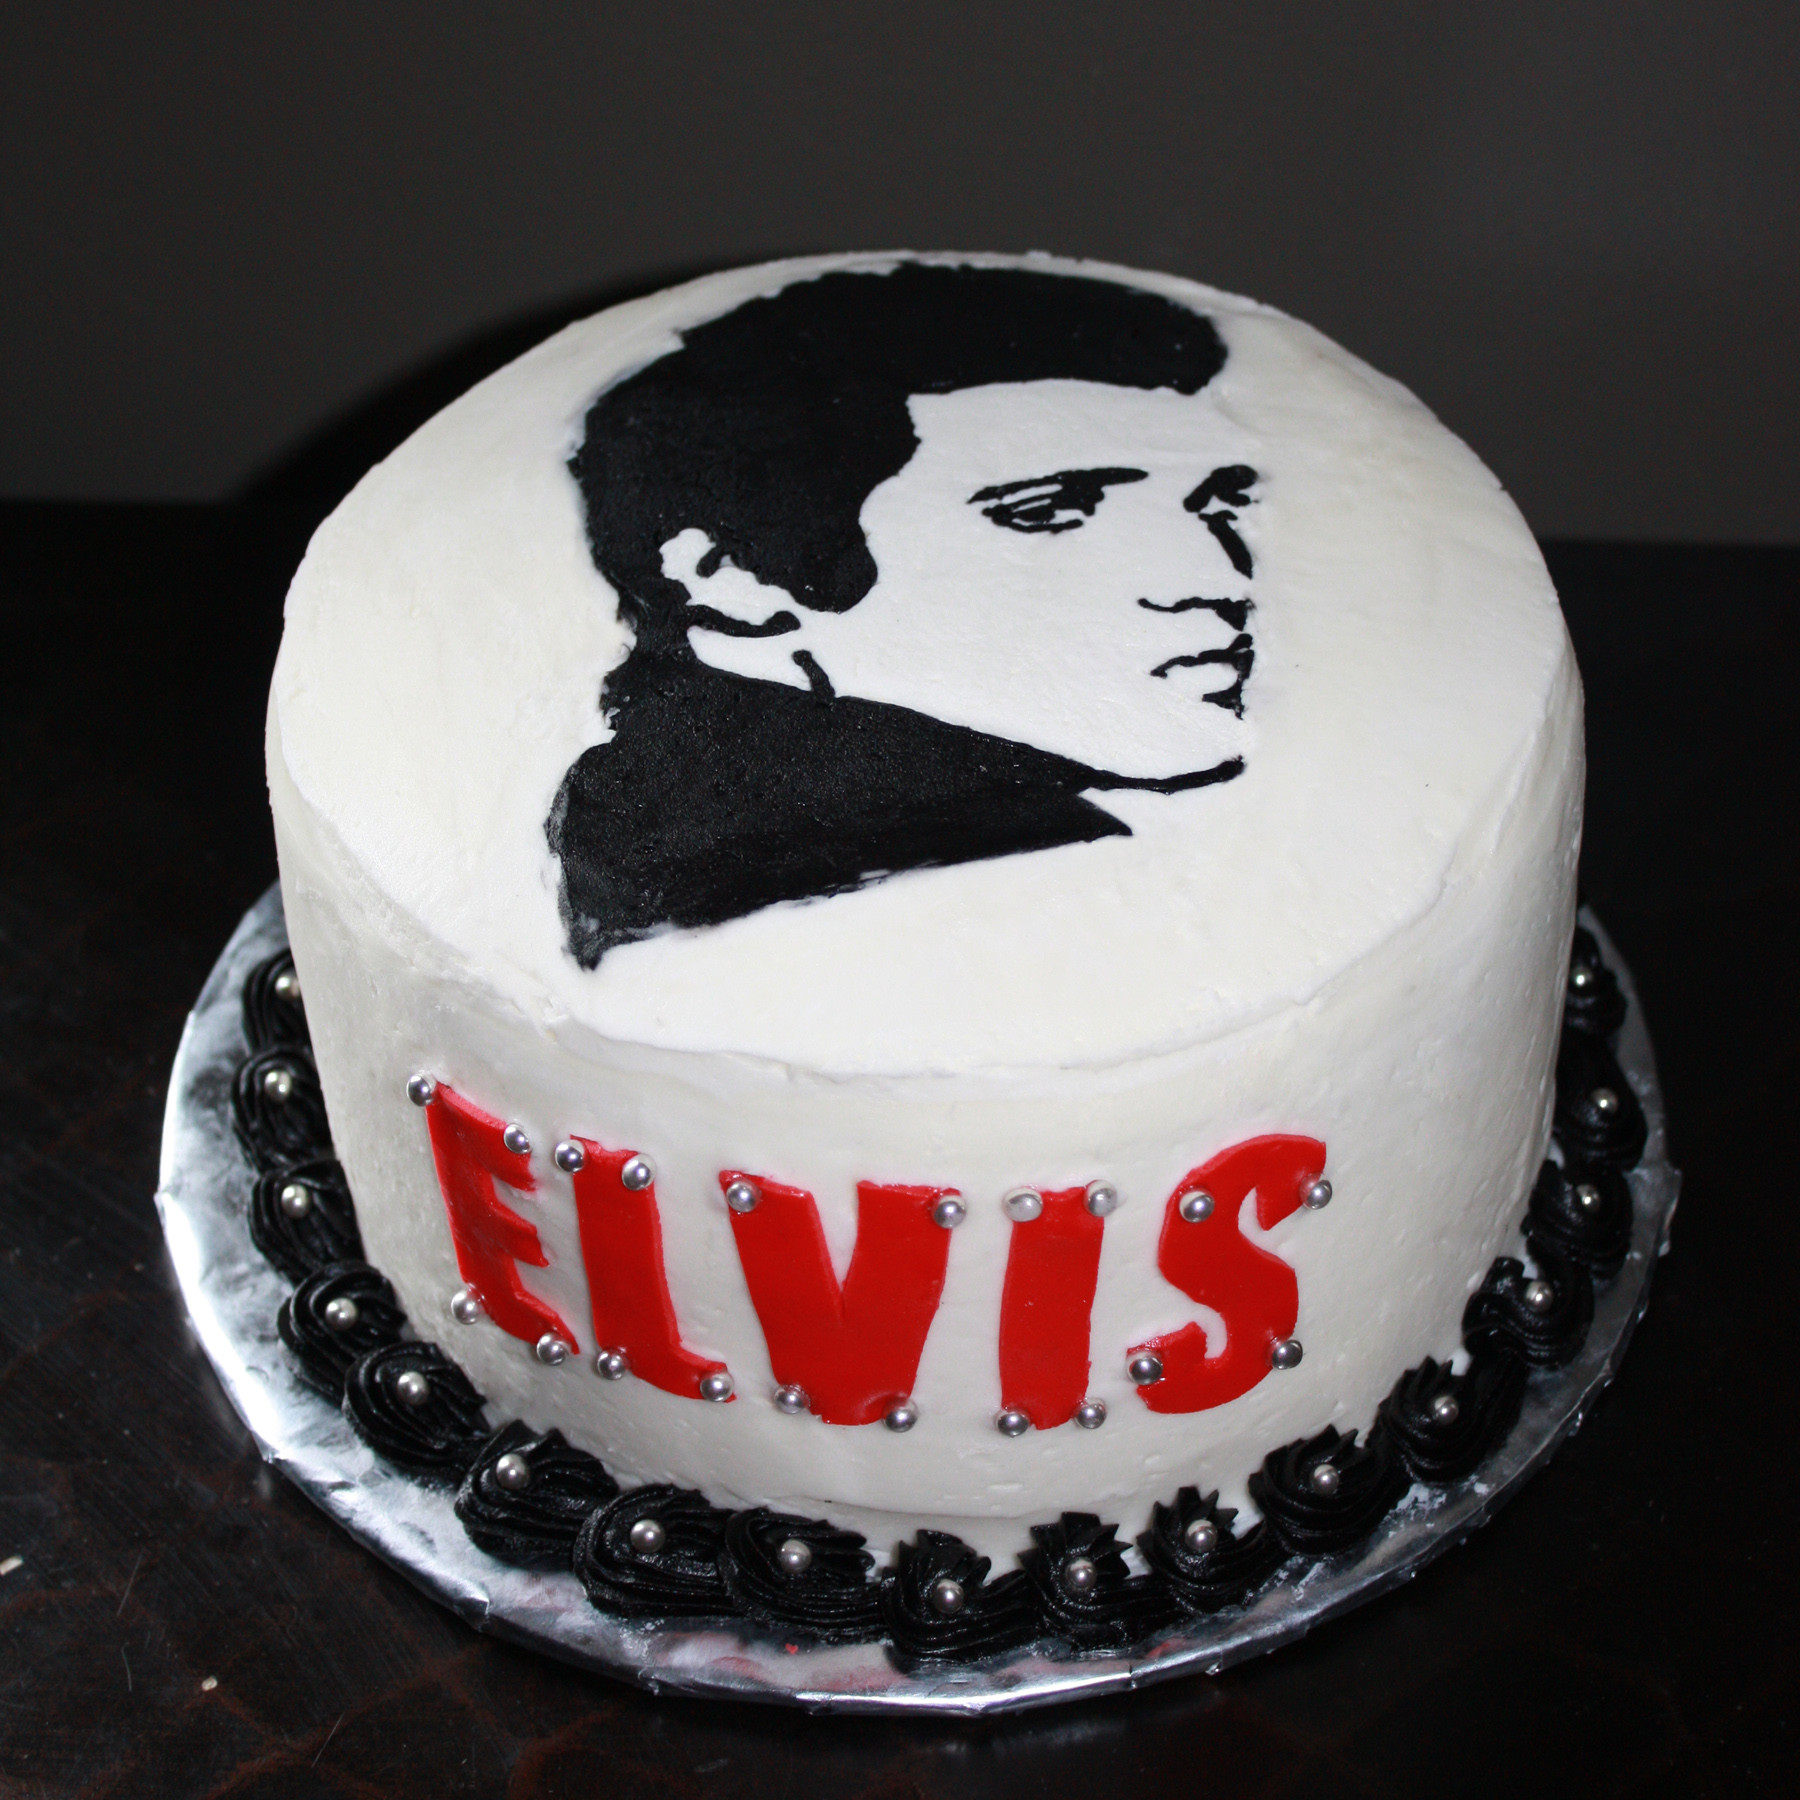 Elvis Birthday Cake
 i’m sorry i put asians on your wall